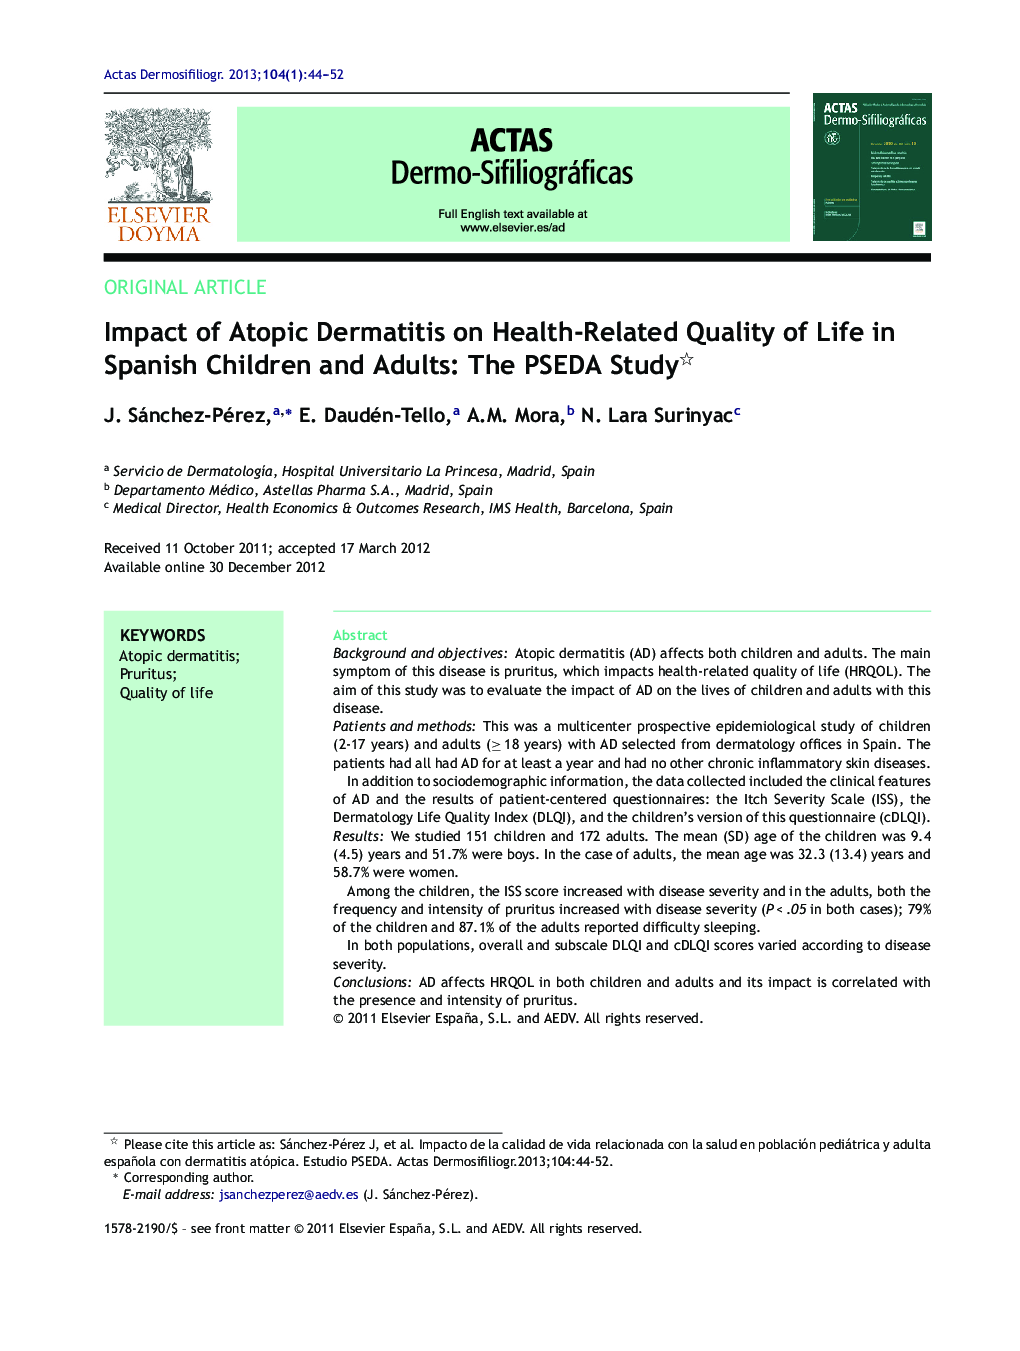 Impact of Atopic Dermatitis on Health-Related Quality of Life in Spanish Children and Adults: The PSEDA Study